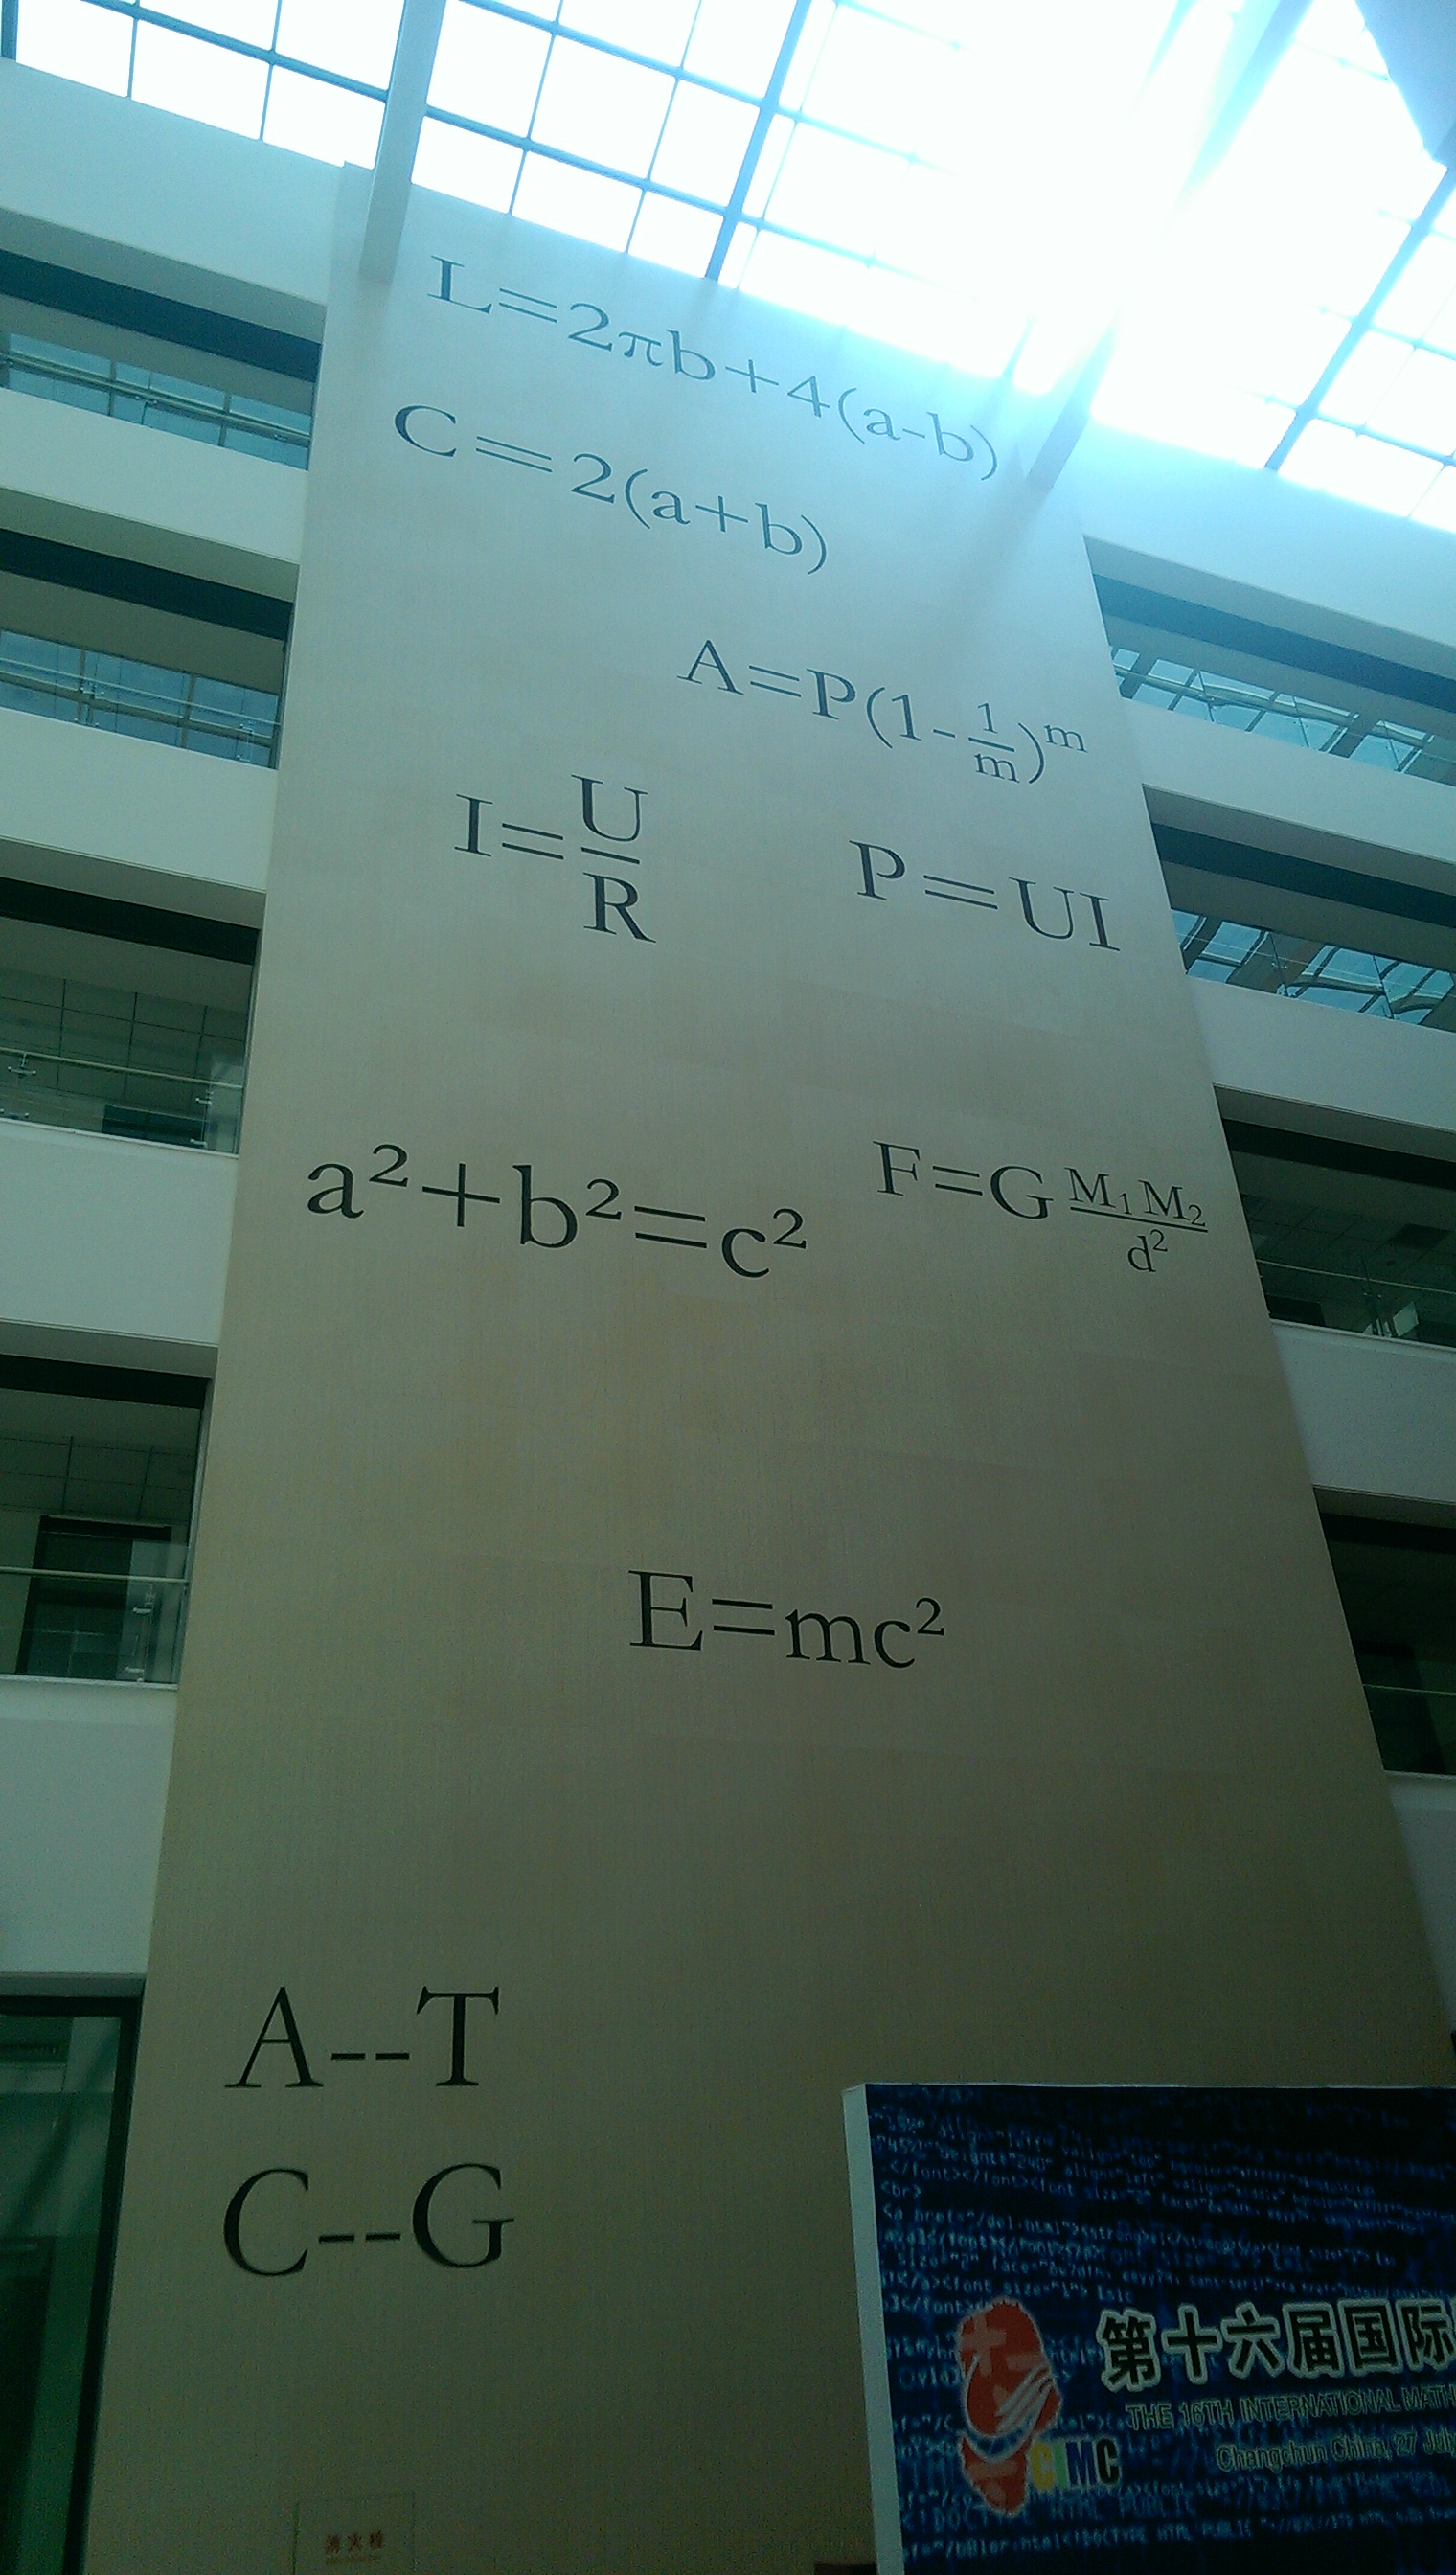 [A wall with equations and scientific laws on it]